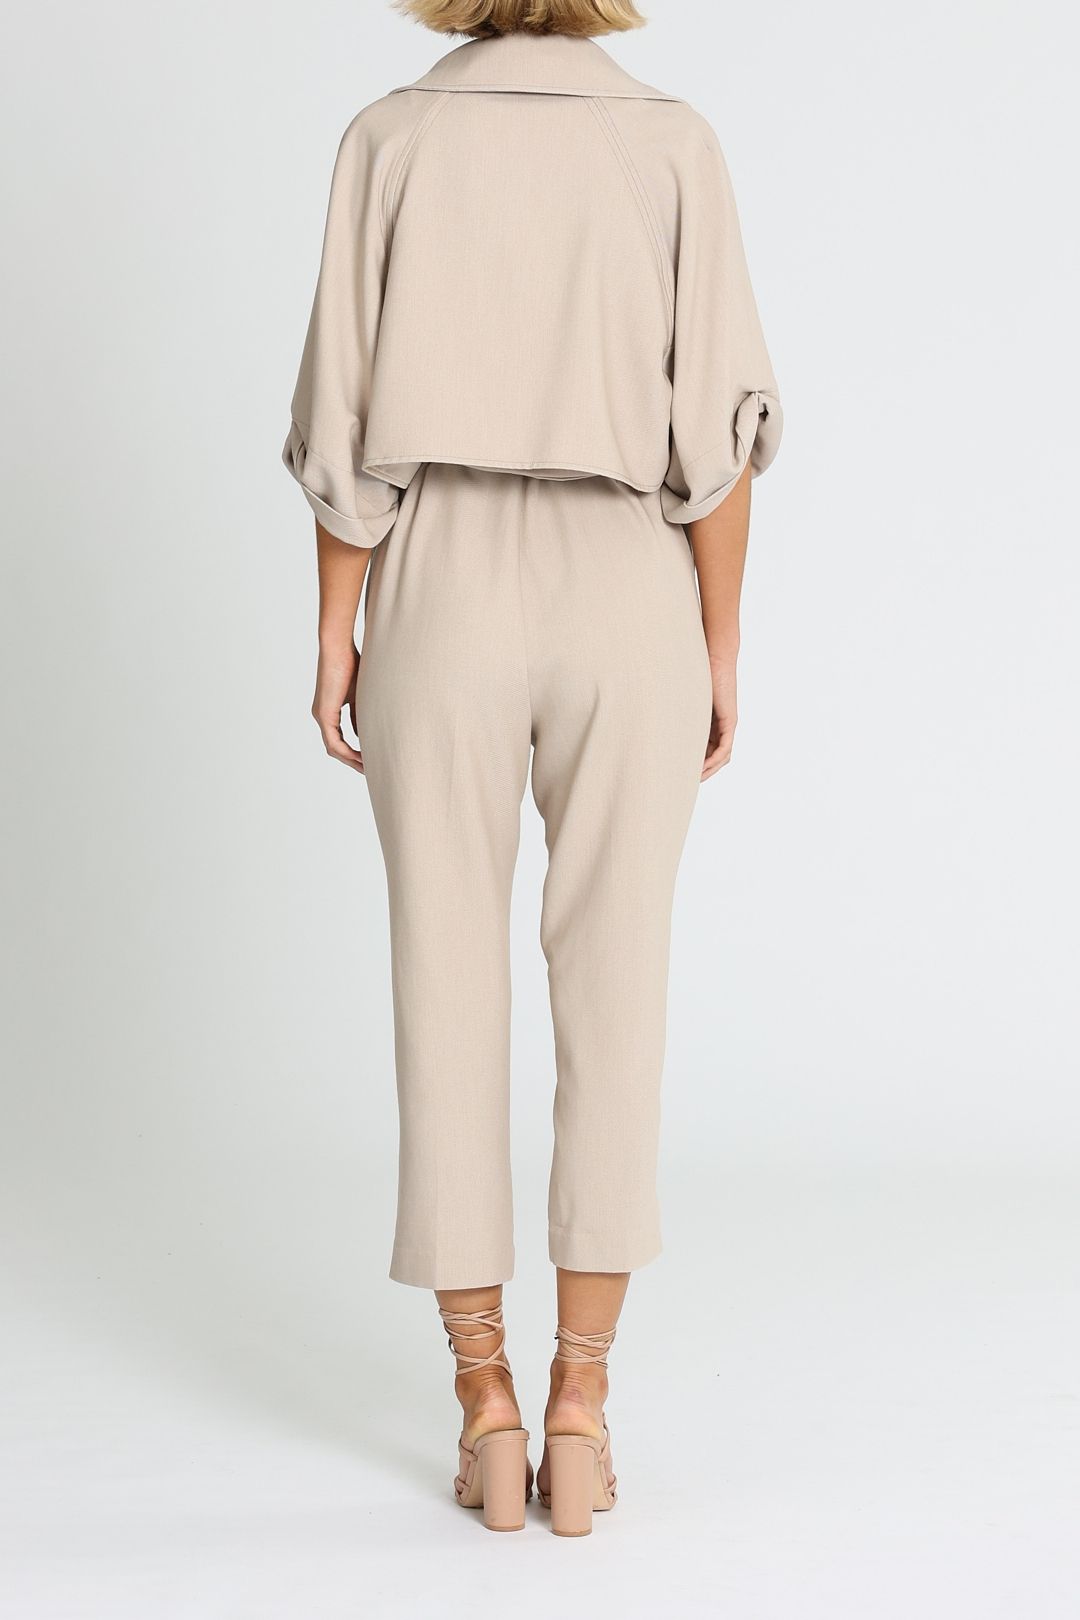 Camilla and Marc Mae Jumpsuit Cropped